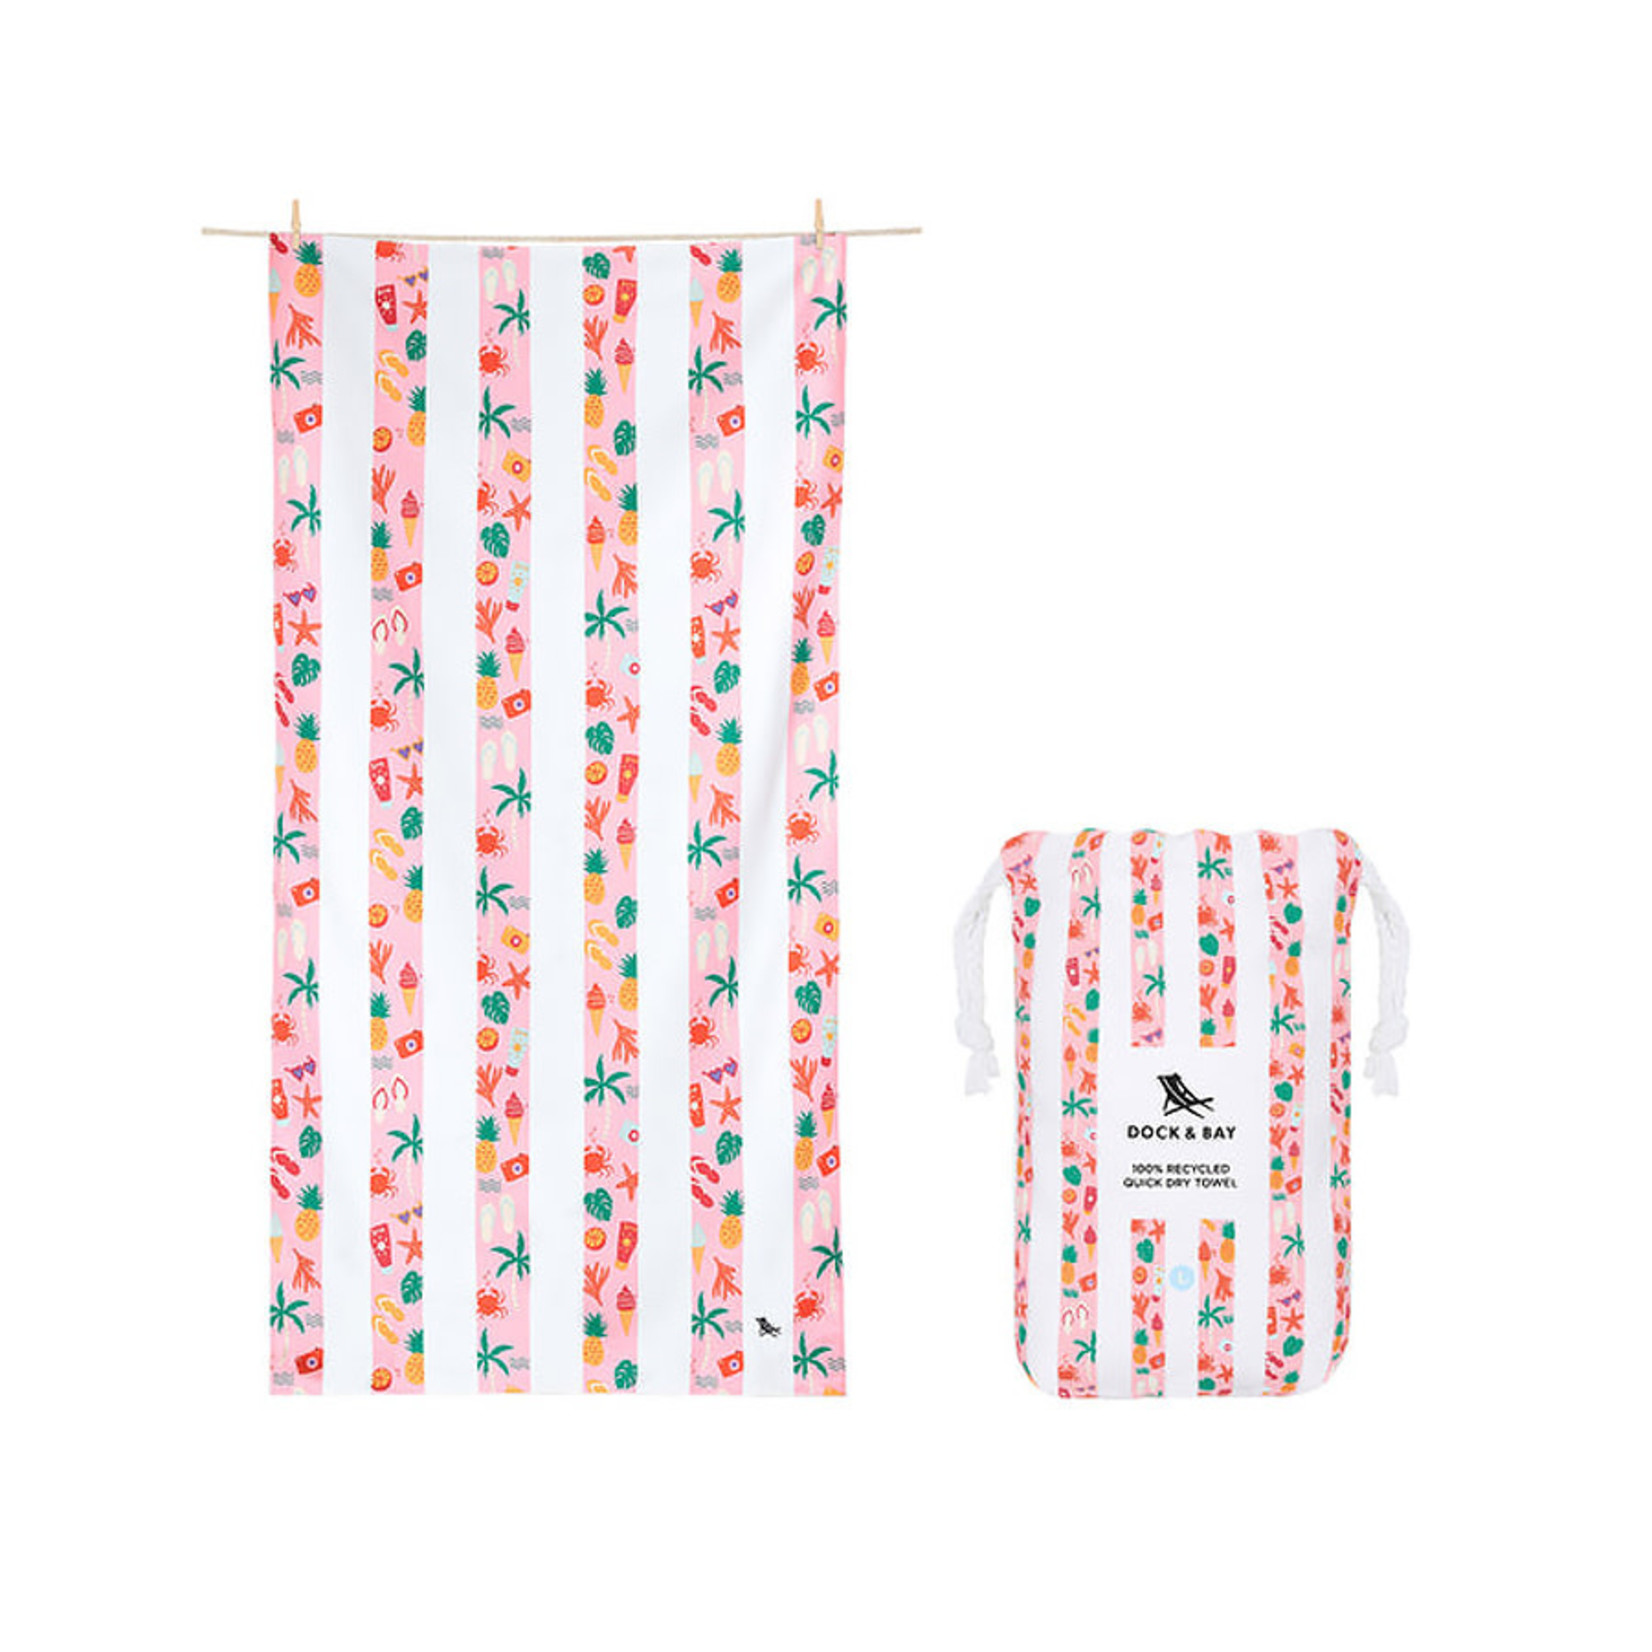 Dock & Bay Quick Dry Towel Kids Collection